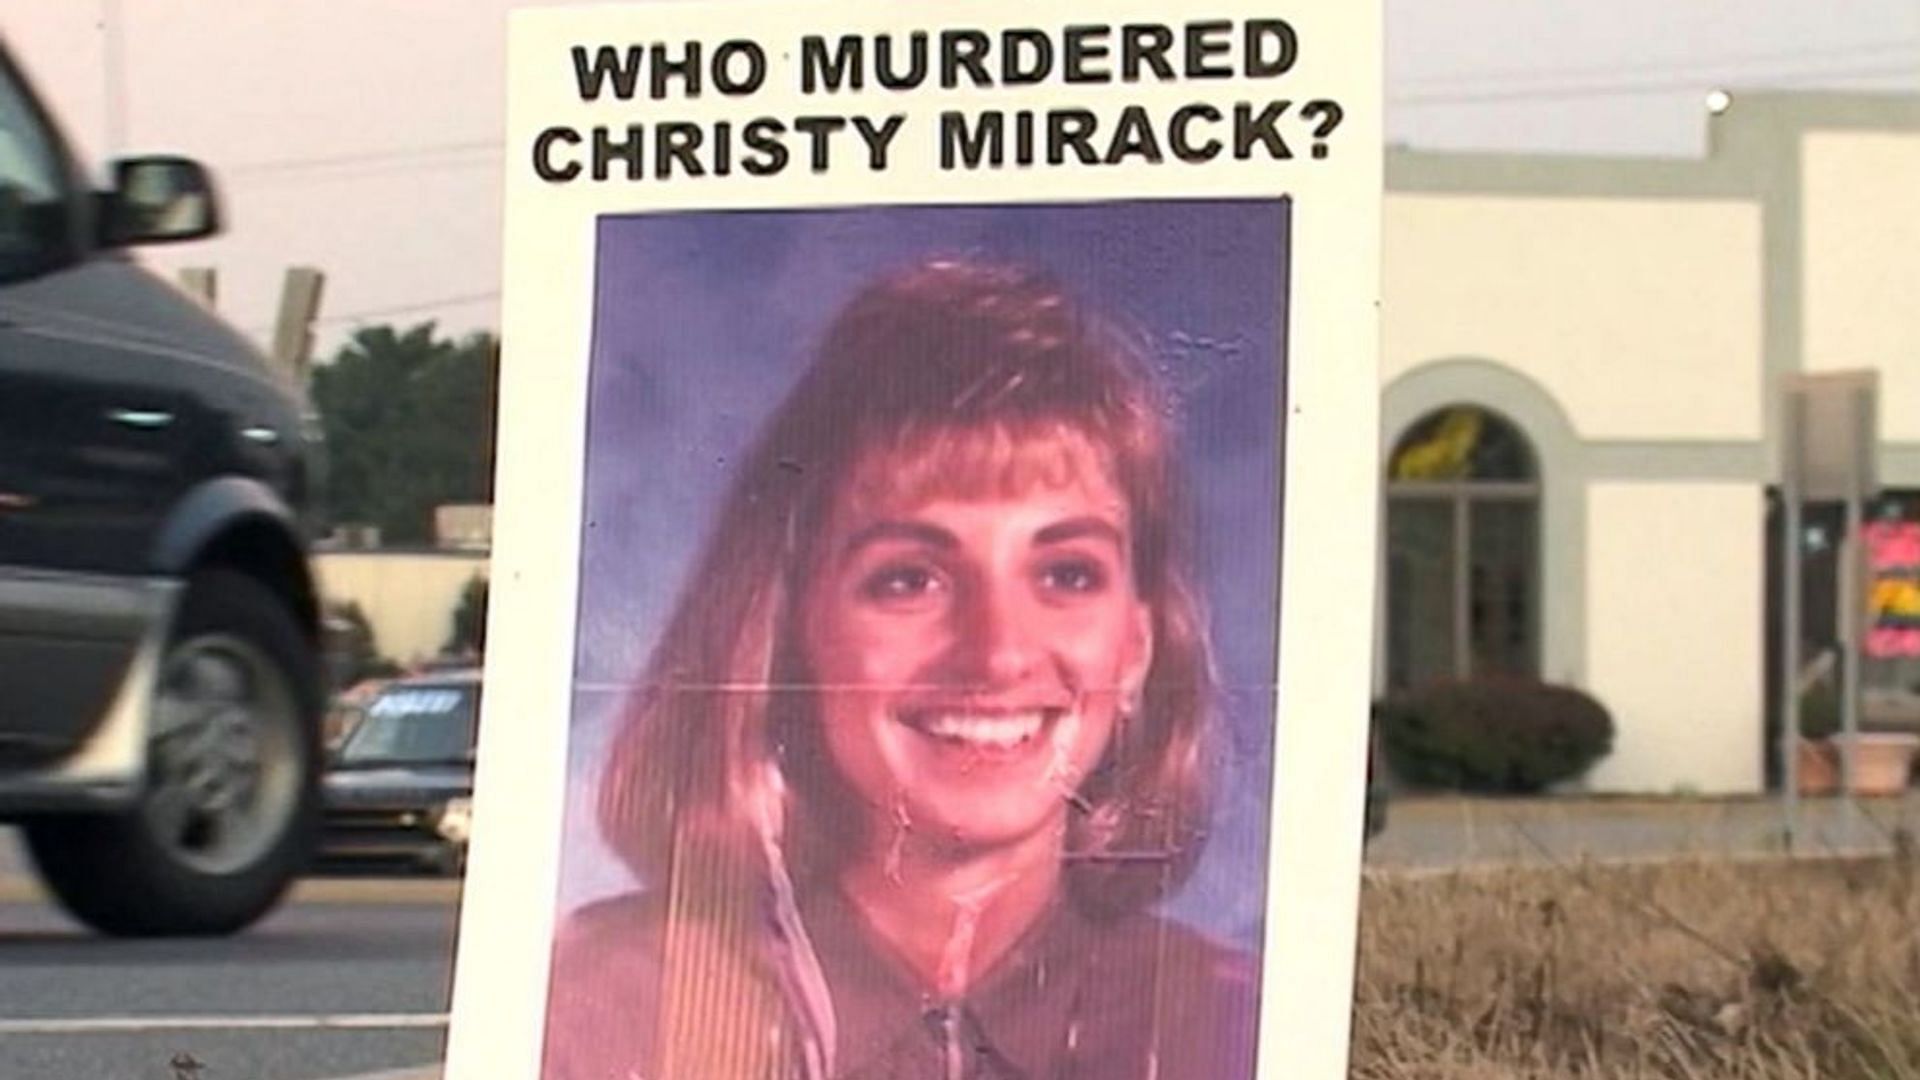 [IMAGE] What happened to Christy Mirack? Unraveled: Once a Killer explores mystery murder case